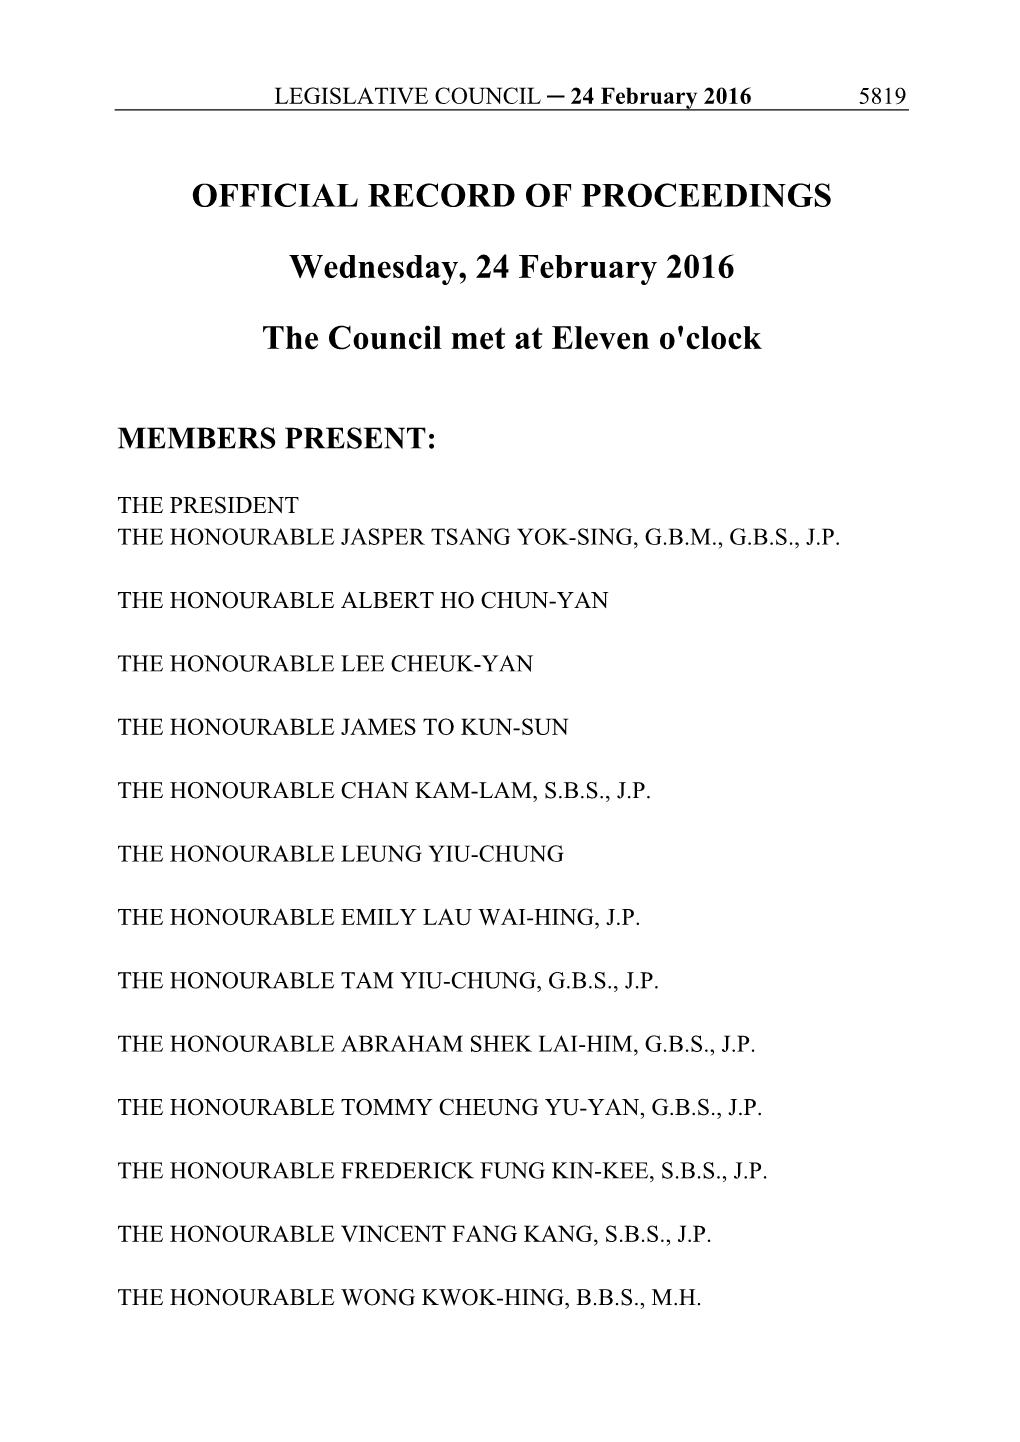 OFFICIAL RECORD of PROCEEDINGS Wednesday, 24 February 2016 the Council Met at Eleven O'clock